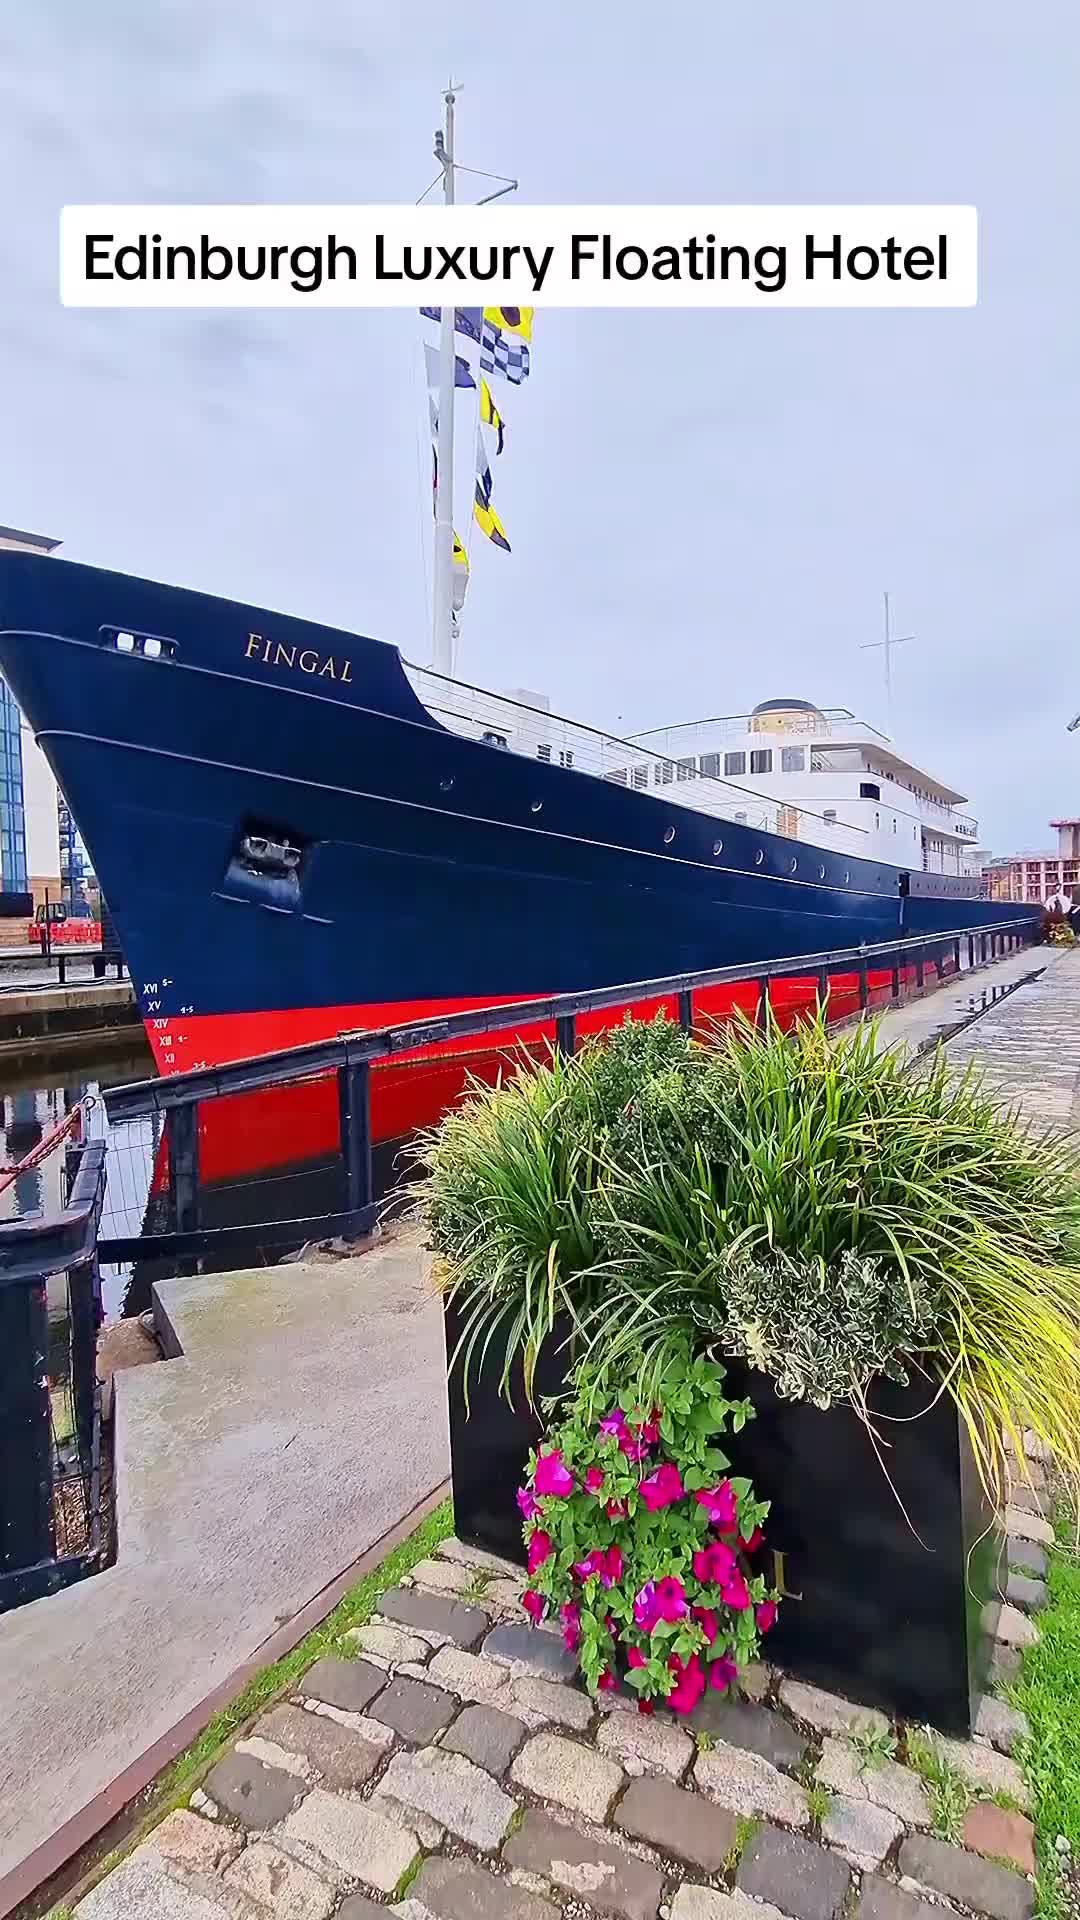 Luxurious Floating Hotel in Edinburgh - Fingal Review